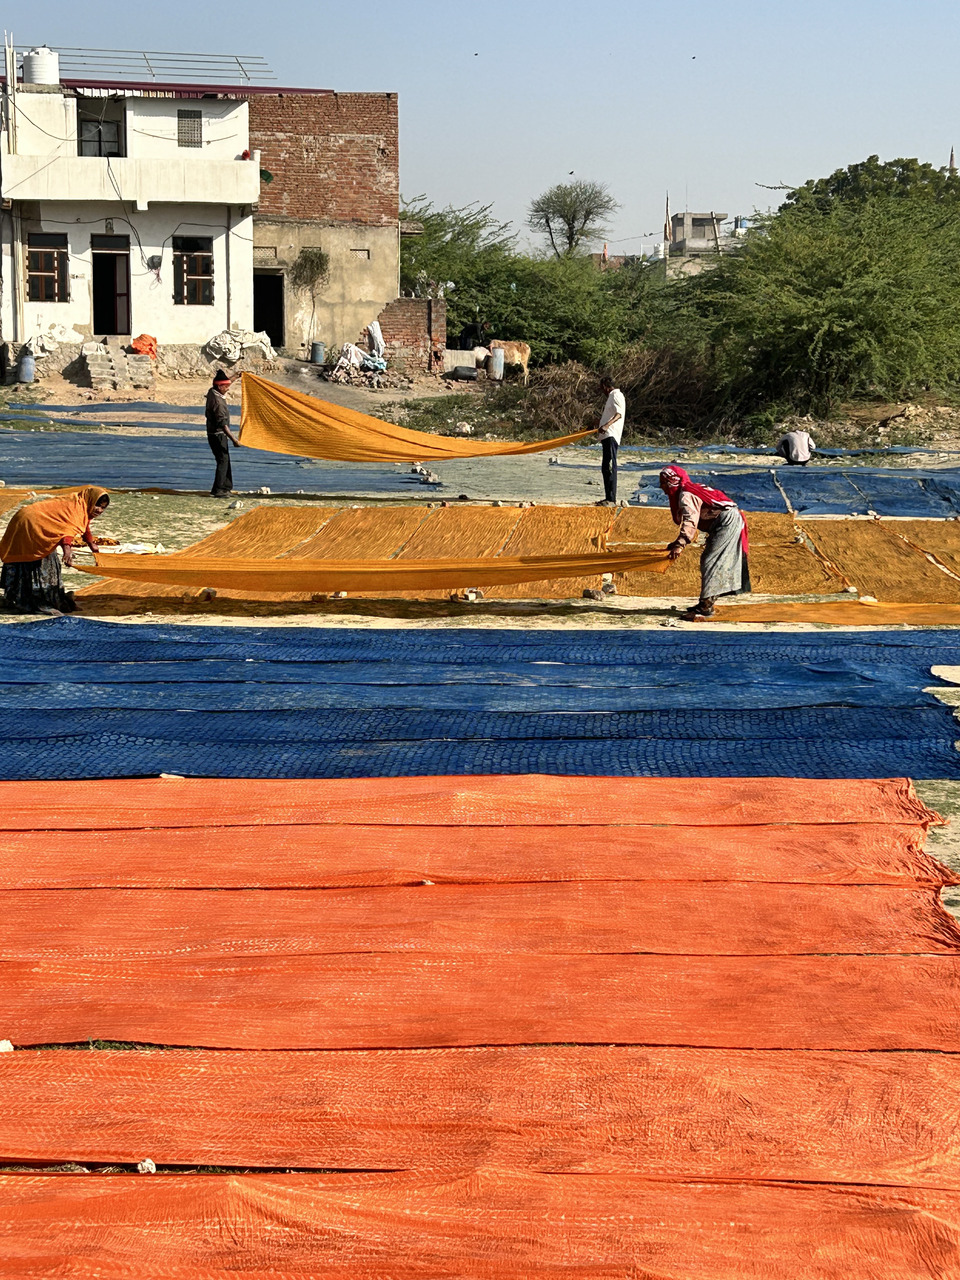 The local washer person and block printers removing the dried pieces of block printed fabric laid out in the sun on the ground.